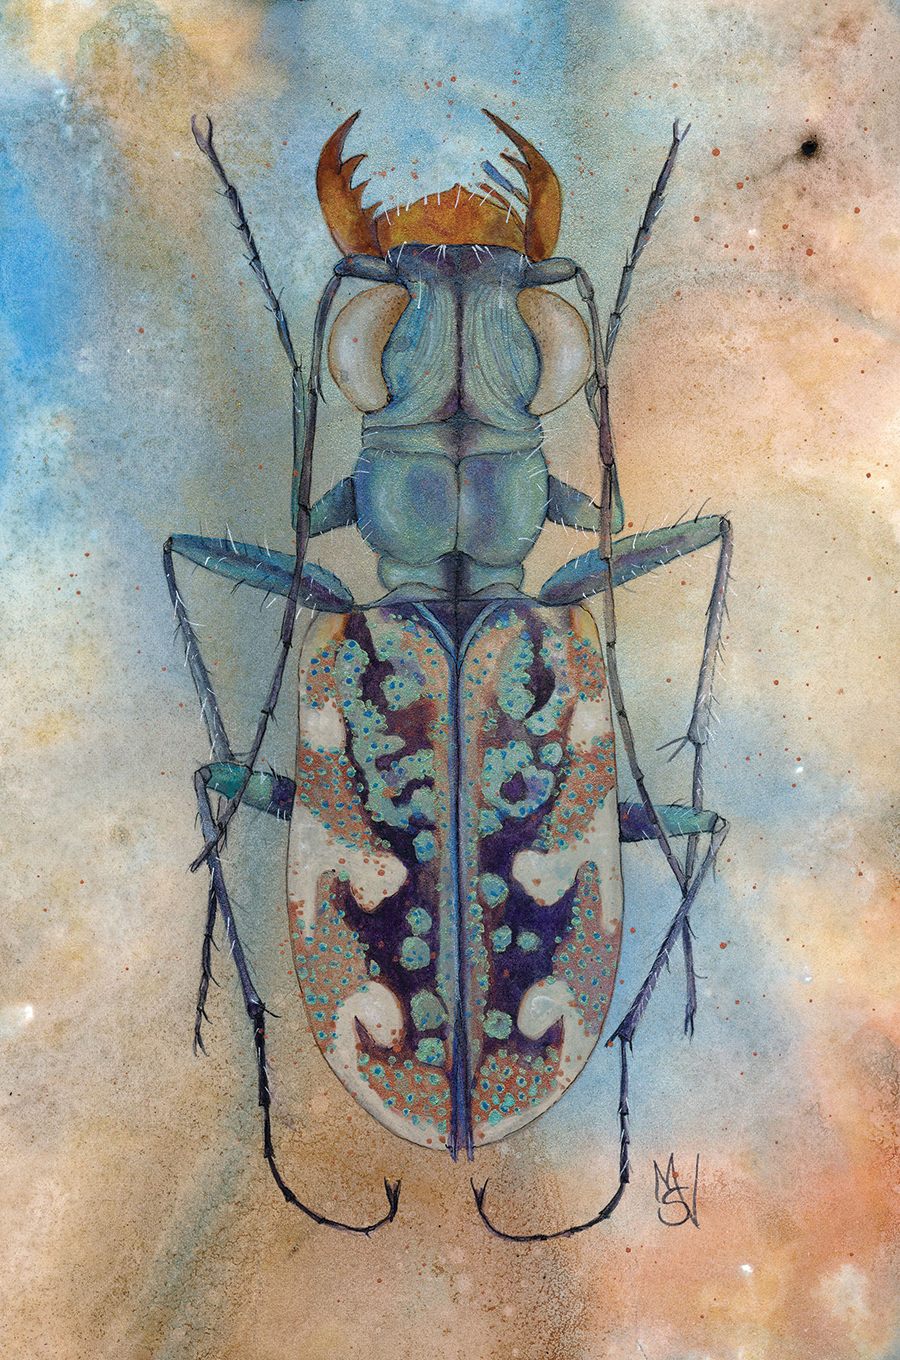 Tiger Beetle, 15 x 12 inches, watercolor